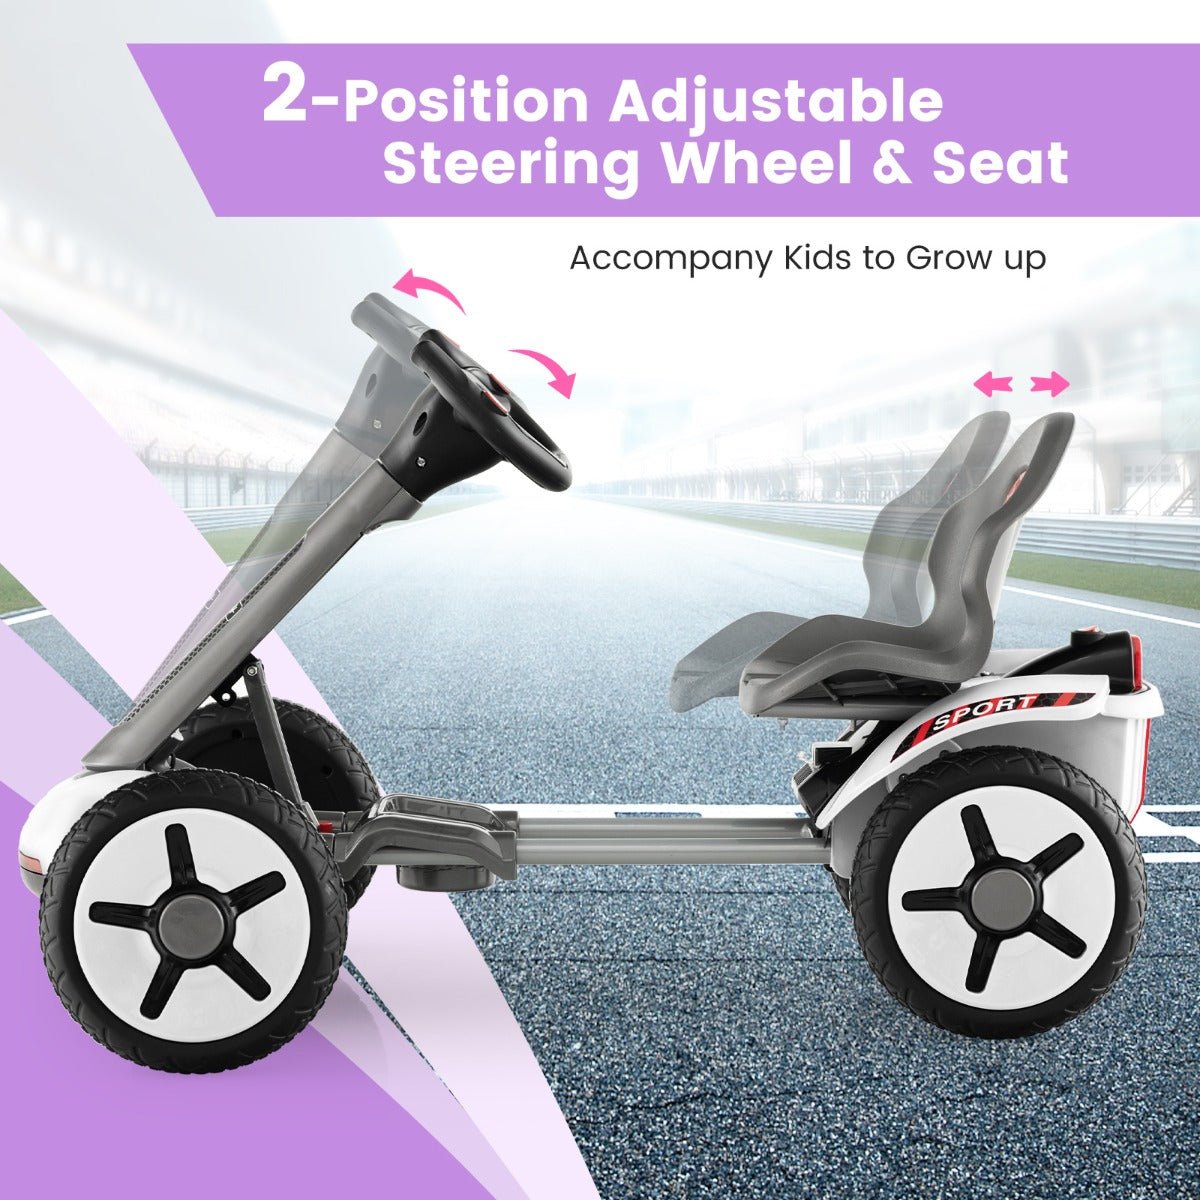 Adjustable Steering wheel and seat Go Kart for Easy Storage and Transport